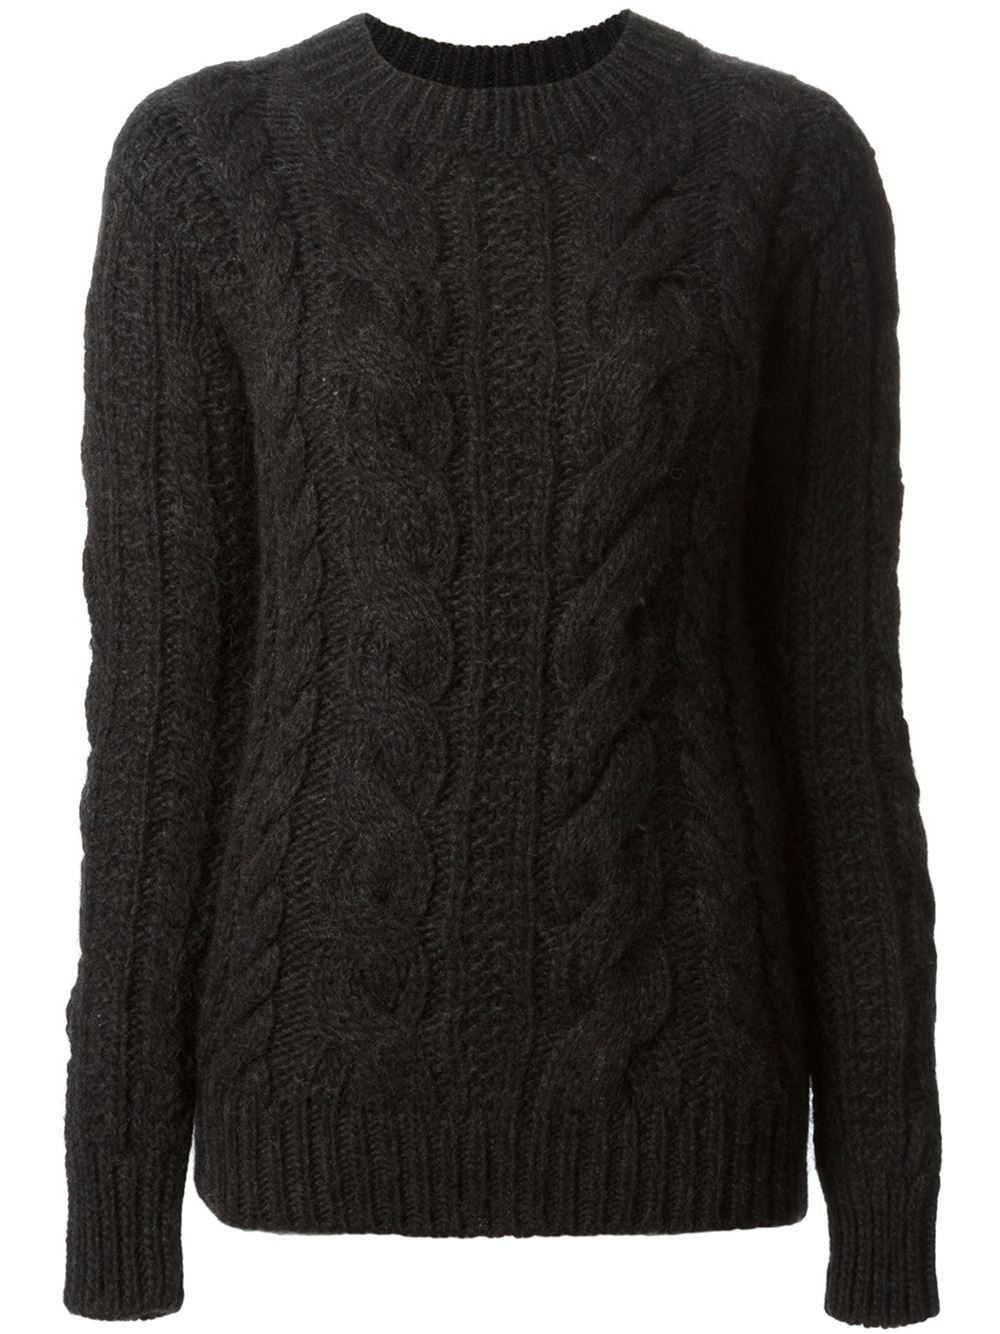 Belstaff Cable Knit Sweater in Black | Lyst